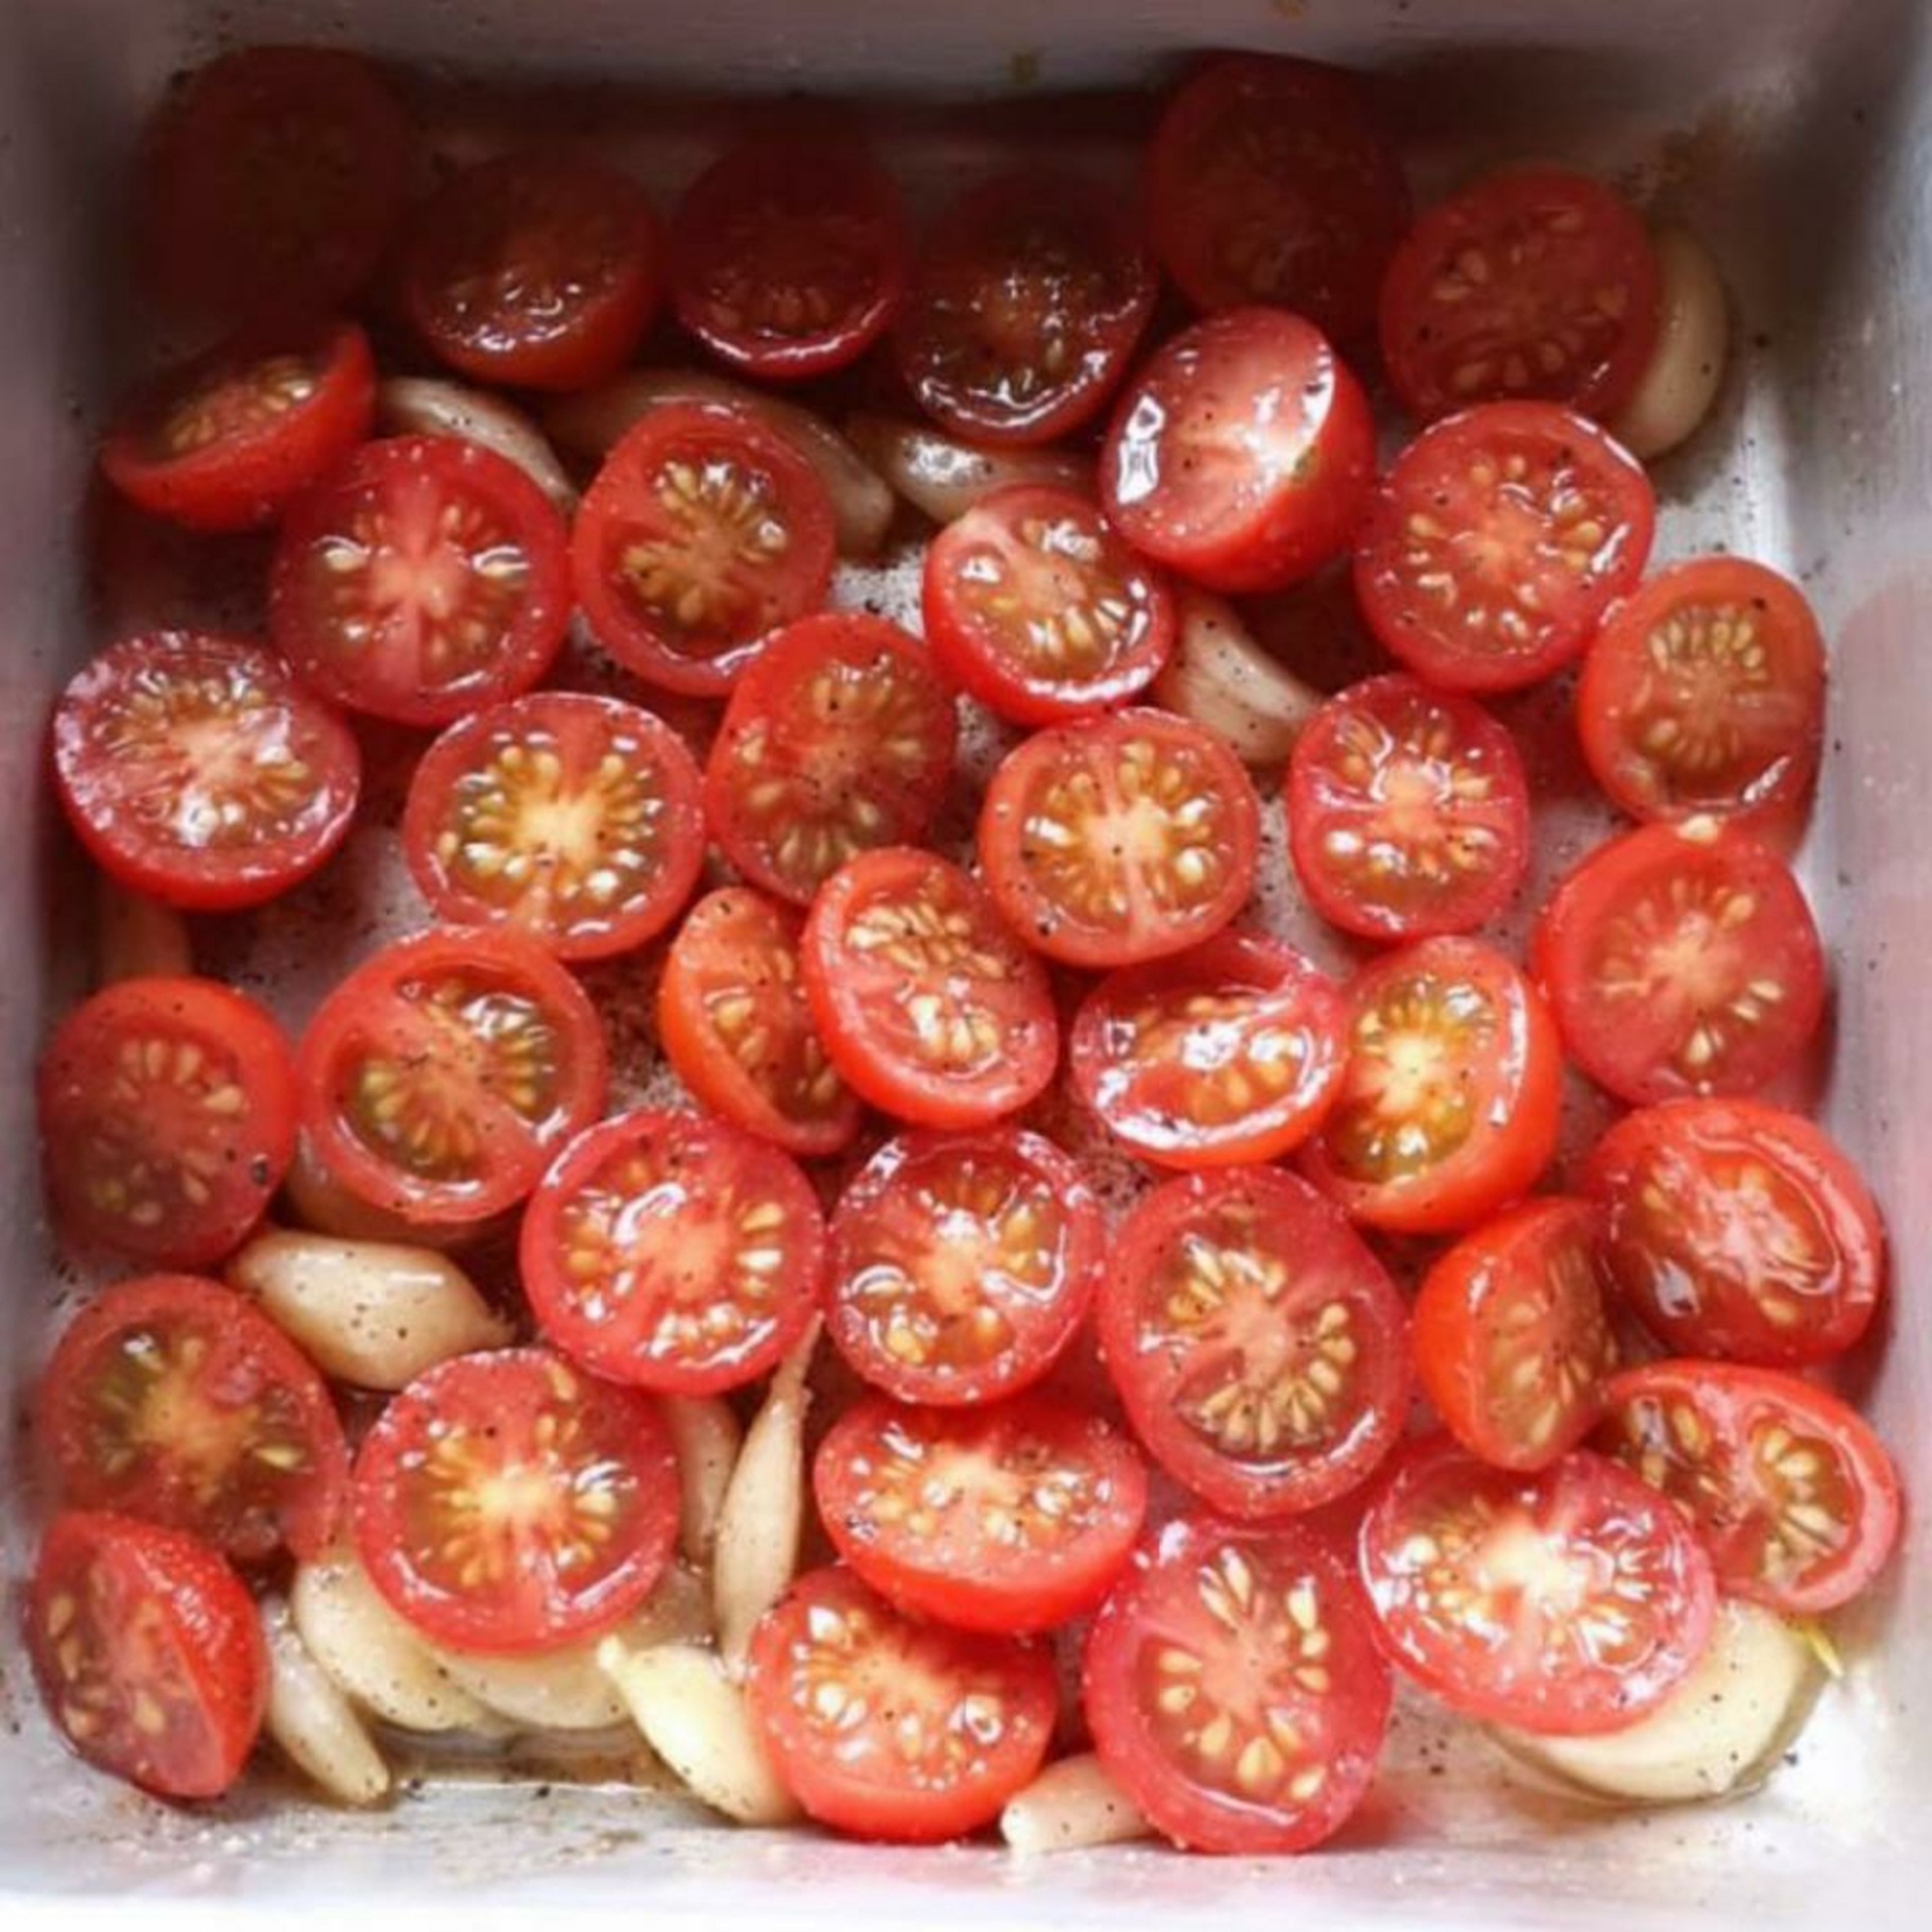 Halve the cherry tomatoes and place in a baking tray along with 5 cloves of garlic, sprinkle salt, black pepper powder and 2 tsp olive oil and toss well. Note: The the cut side of the tomato should be facing upwards as shown in the picture. Roast in an oven at 180°C for 20 mins. Remove from the oven and set aside.